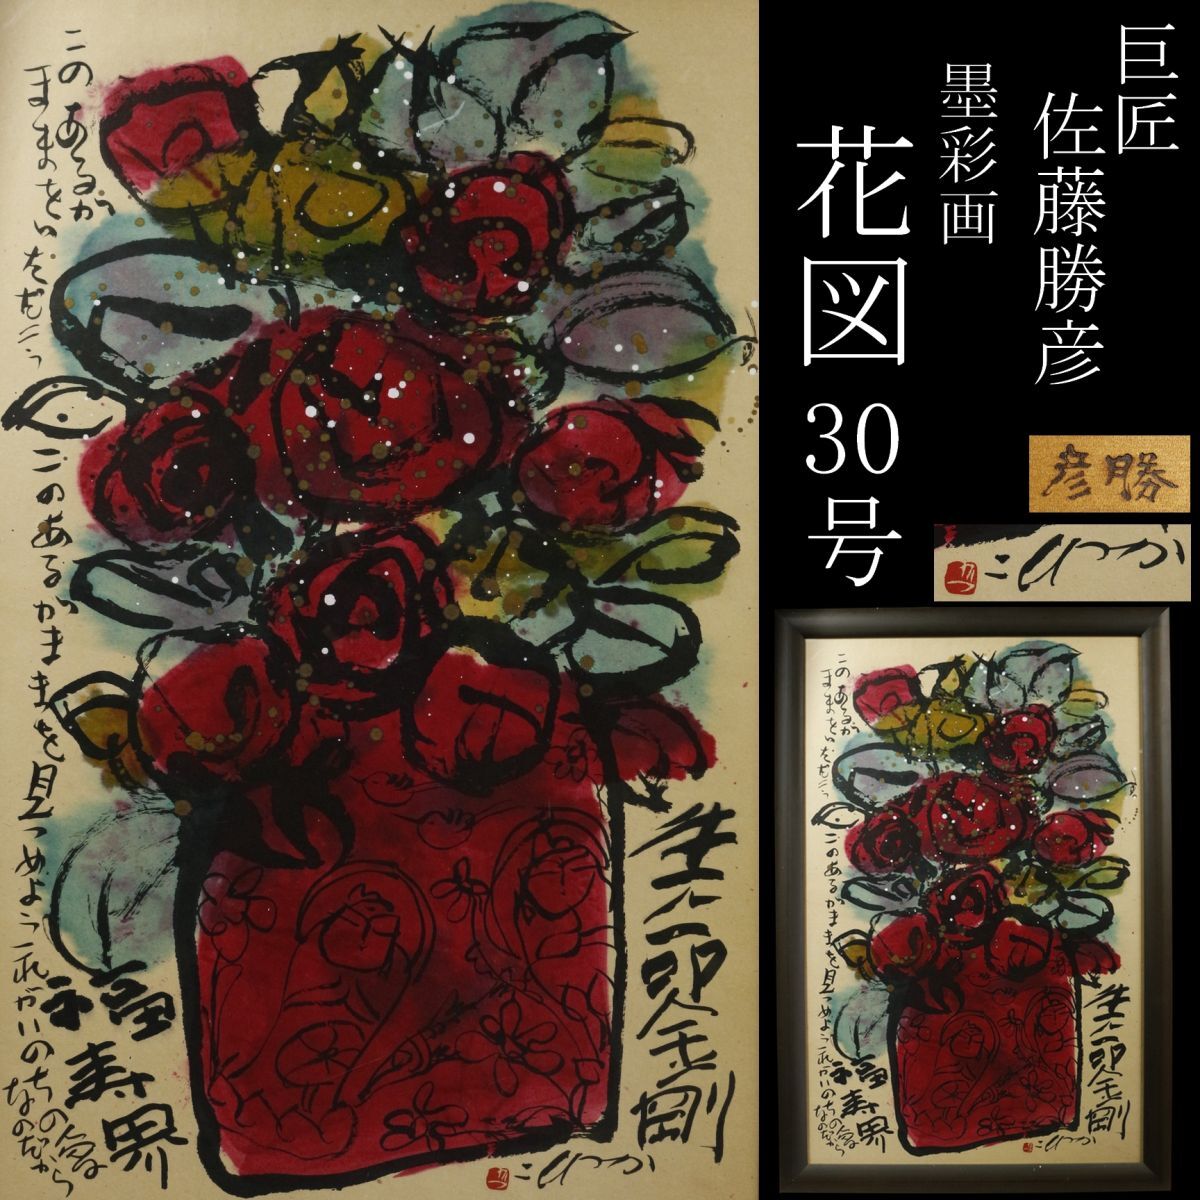 [LIG] Guaranteed Authenticity Master Katsuhiko Sato Flower Drawing Ink Color Painting No. 30 Paper Handwritten French Painting Collector's Collection [.WP]24.1, artwork, painting, Ink painting